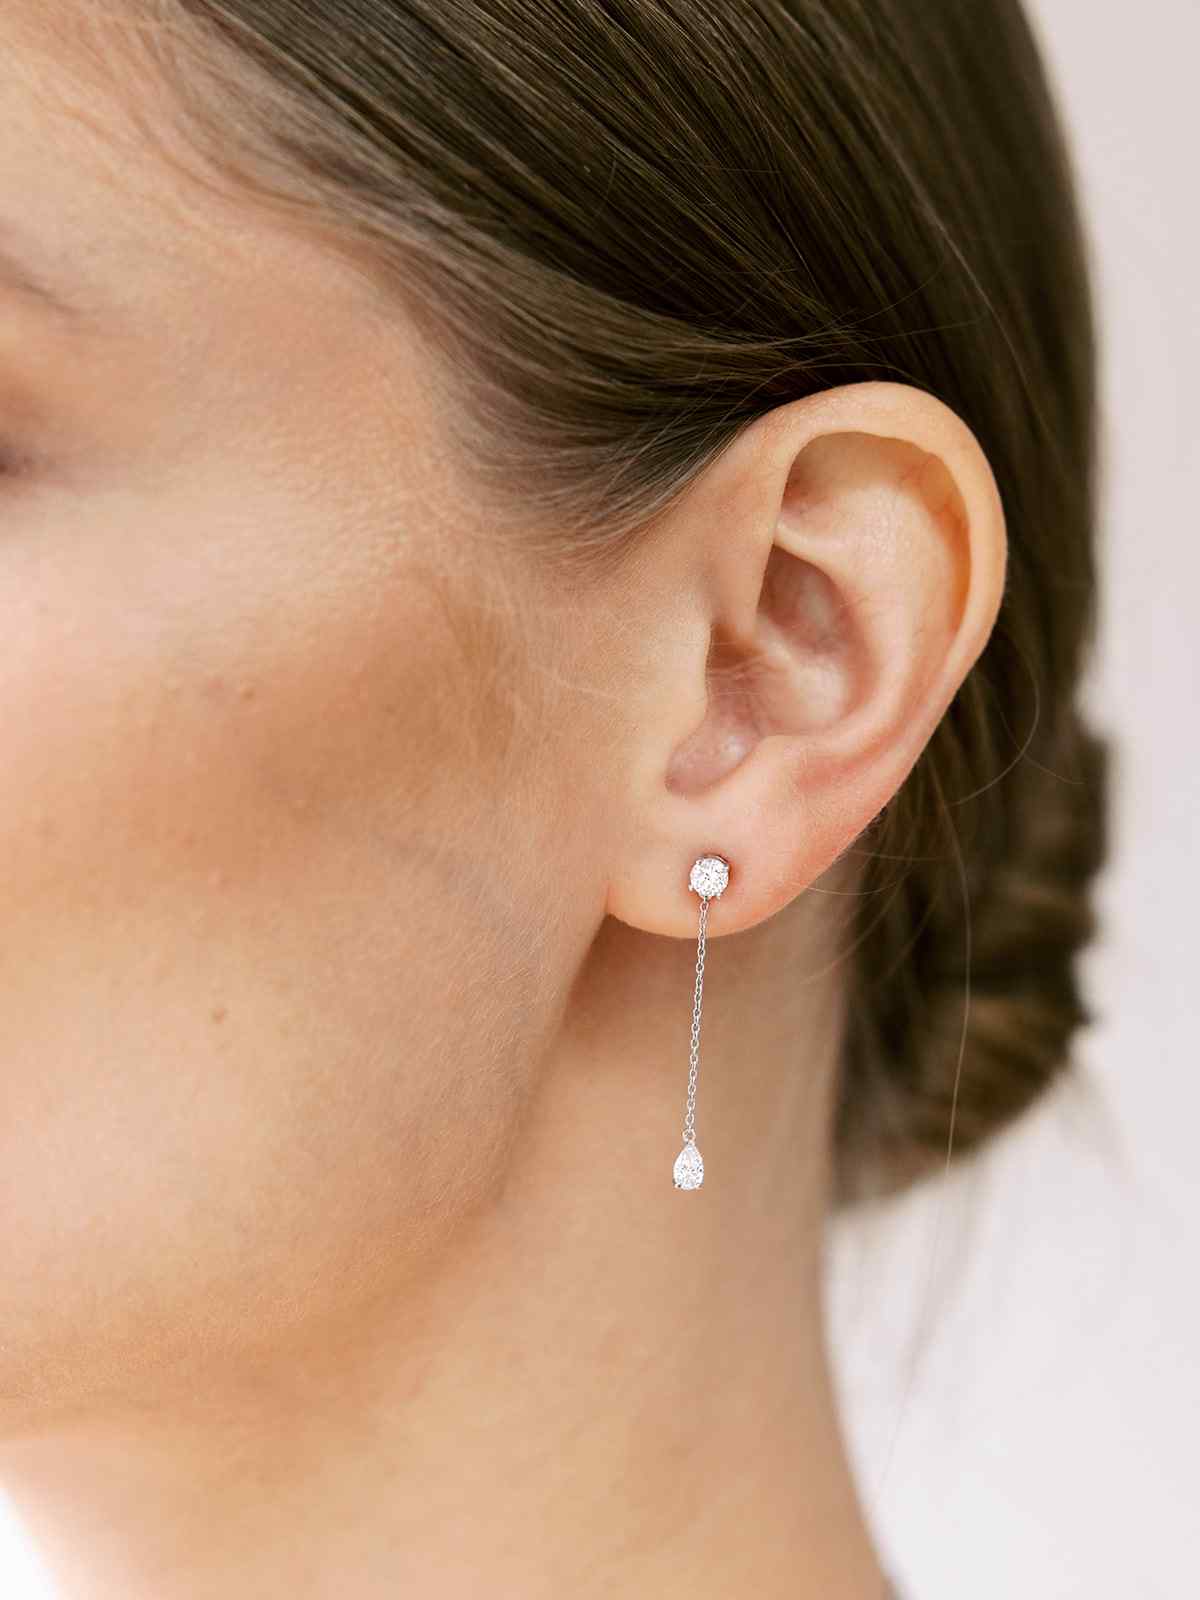 Diamond shapes - A round diamond scintillates from 57 facets. This shape is as timeless as it is brilliant. A model wears the Lariat Deux drop earrings - featuring a round brilliant at the stud.